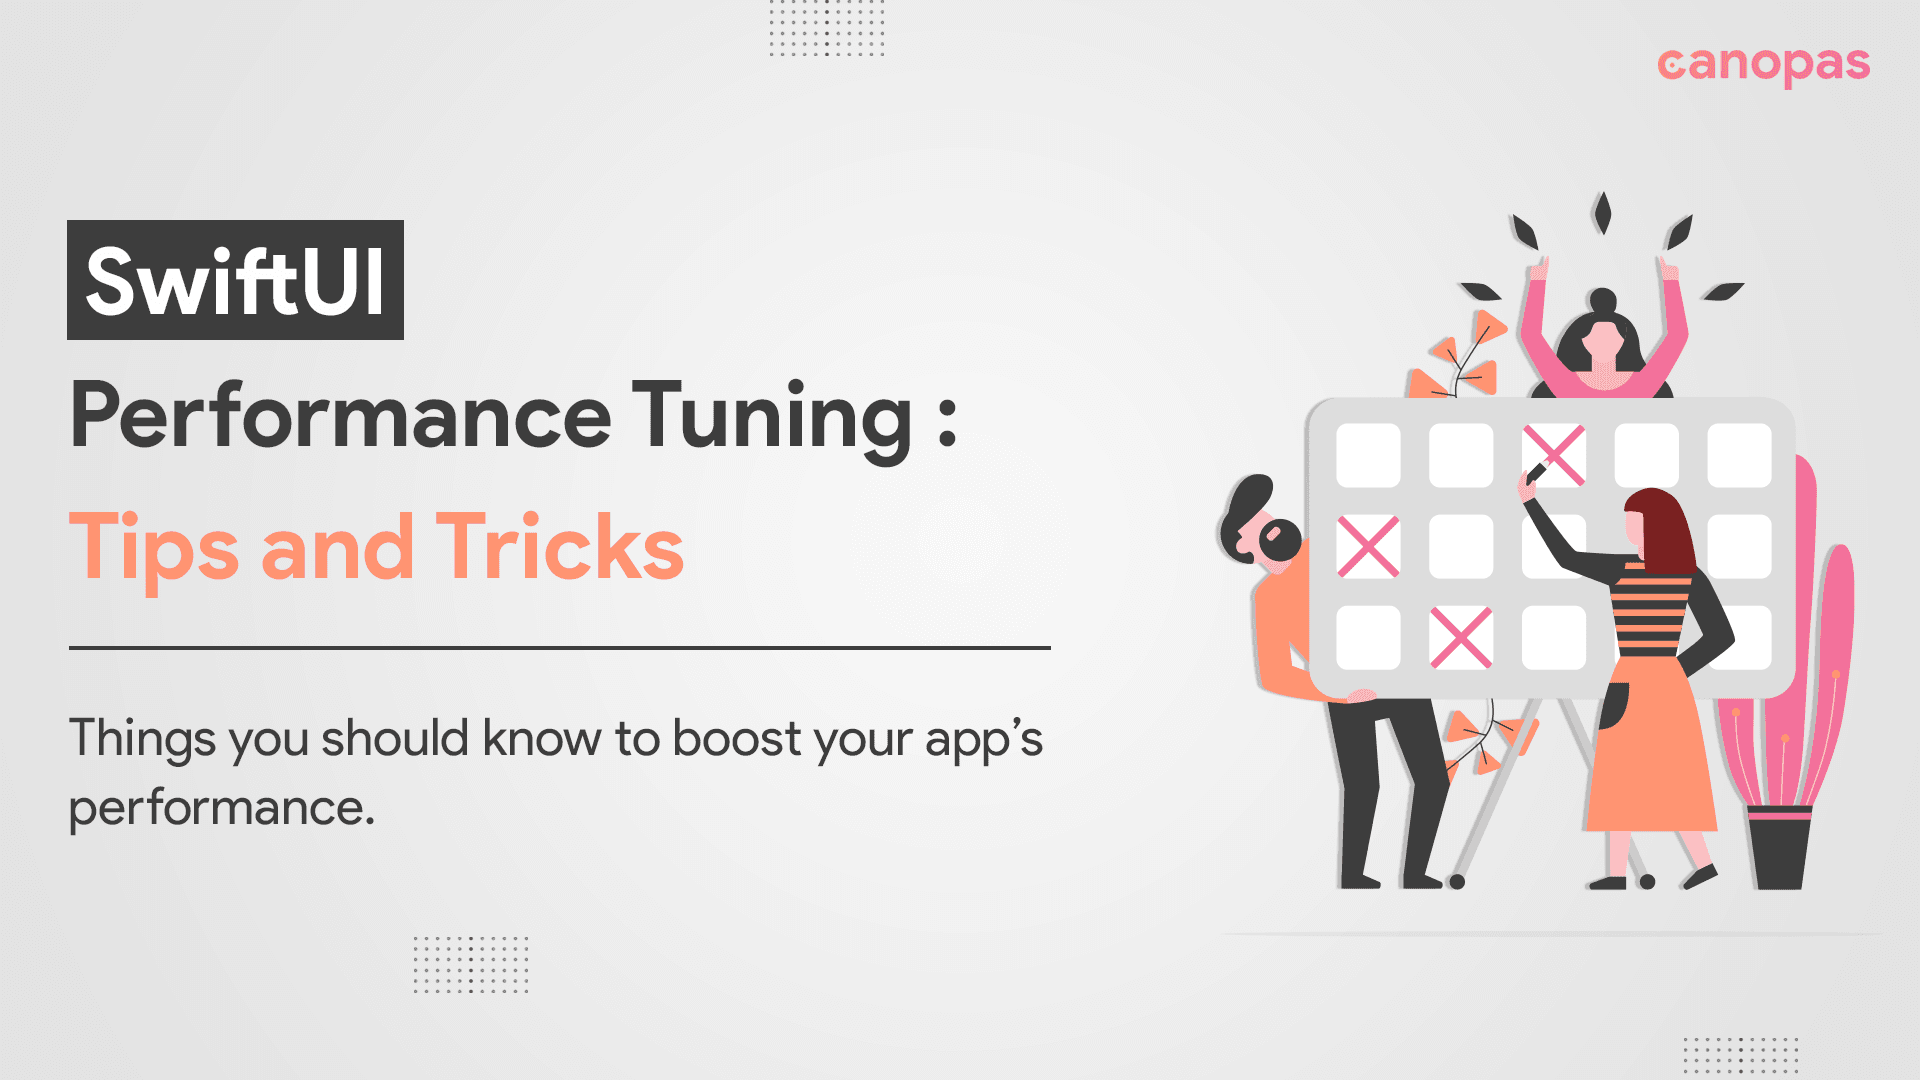 SwiftUI Performance Tuning: Tips and Tricks